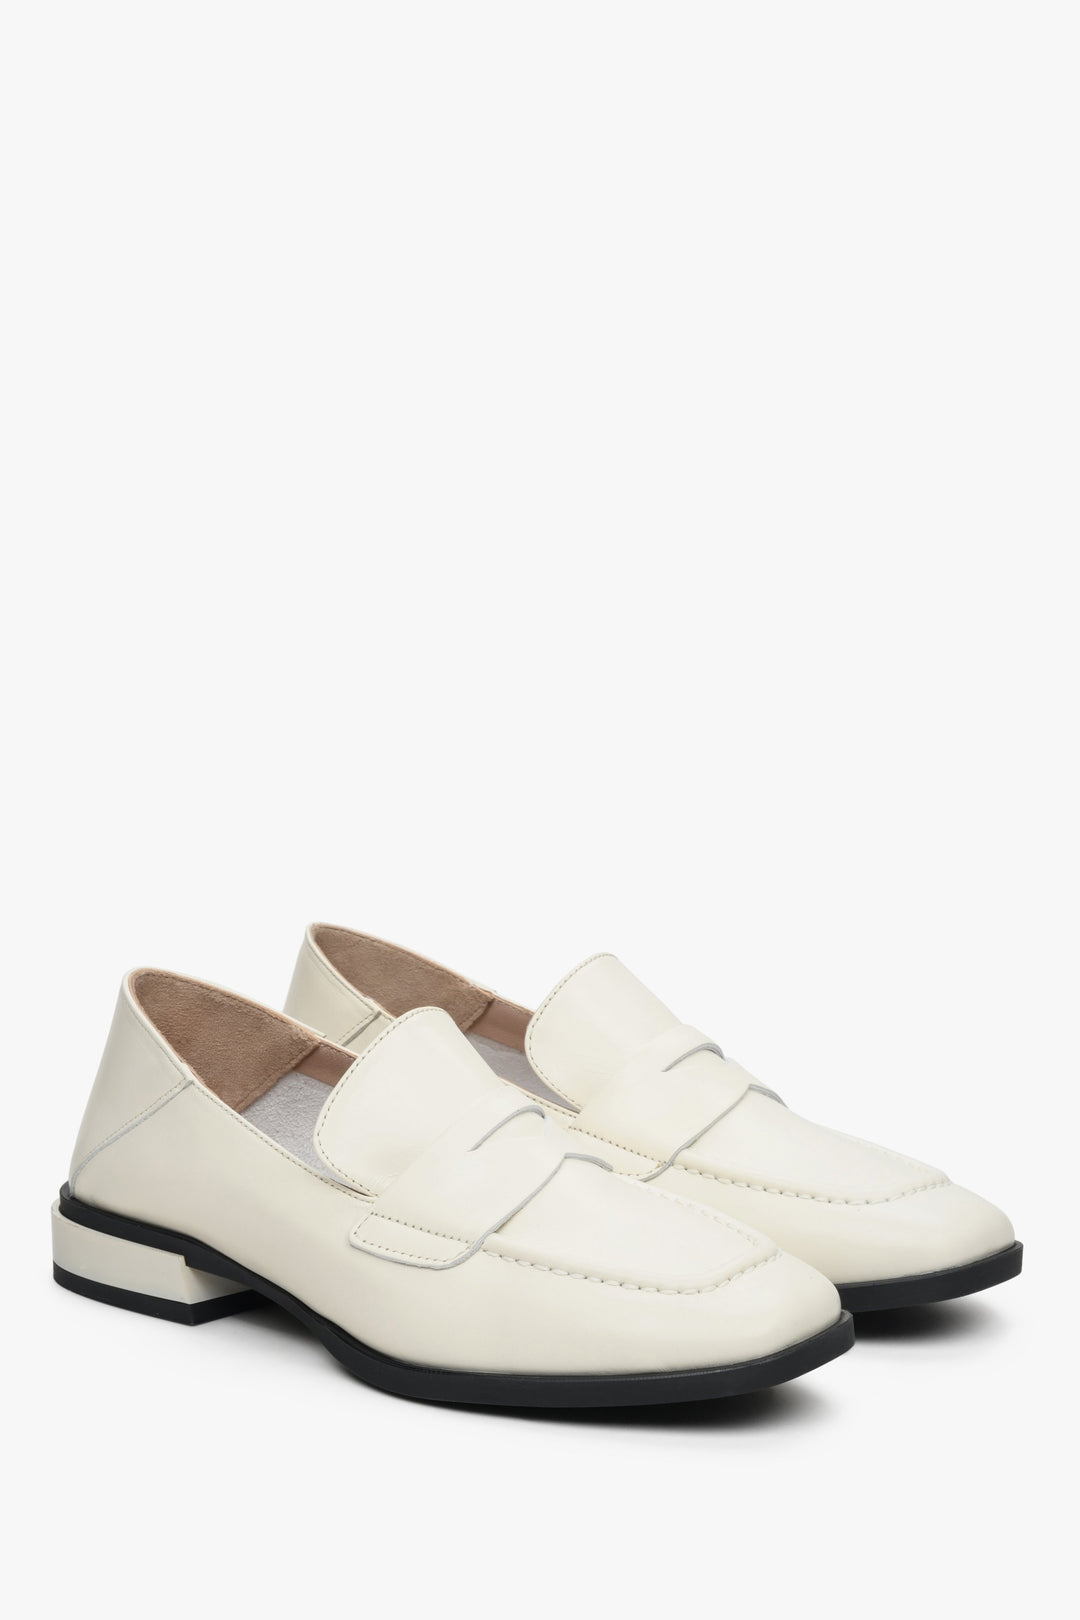 Women's white leather loafers with a low heel by Estro - presentation of the toe of the shoes.